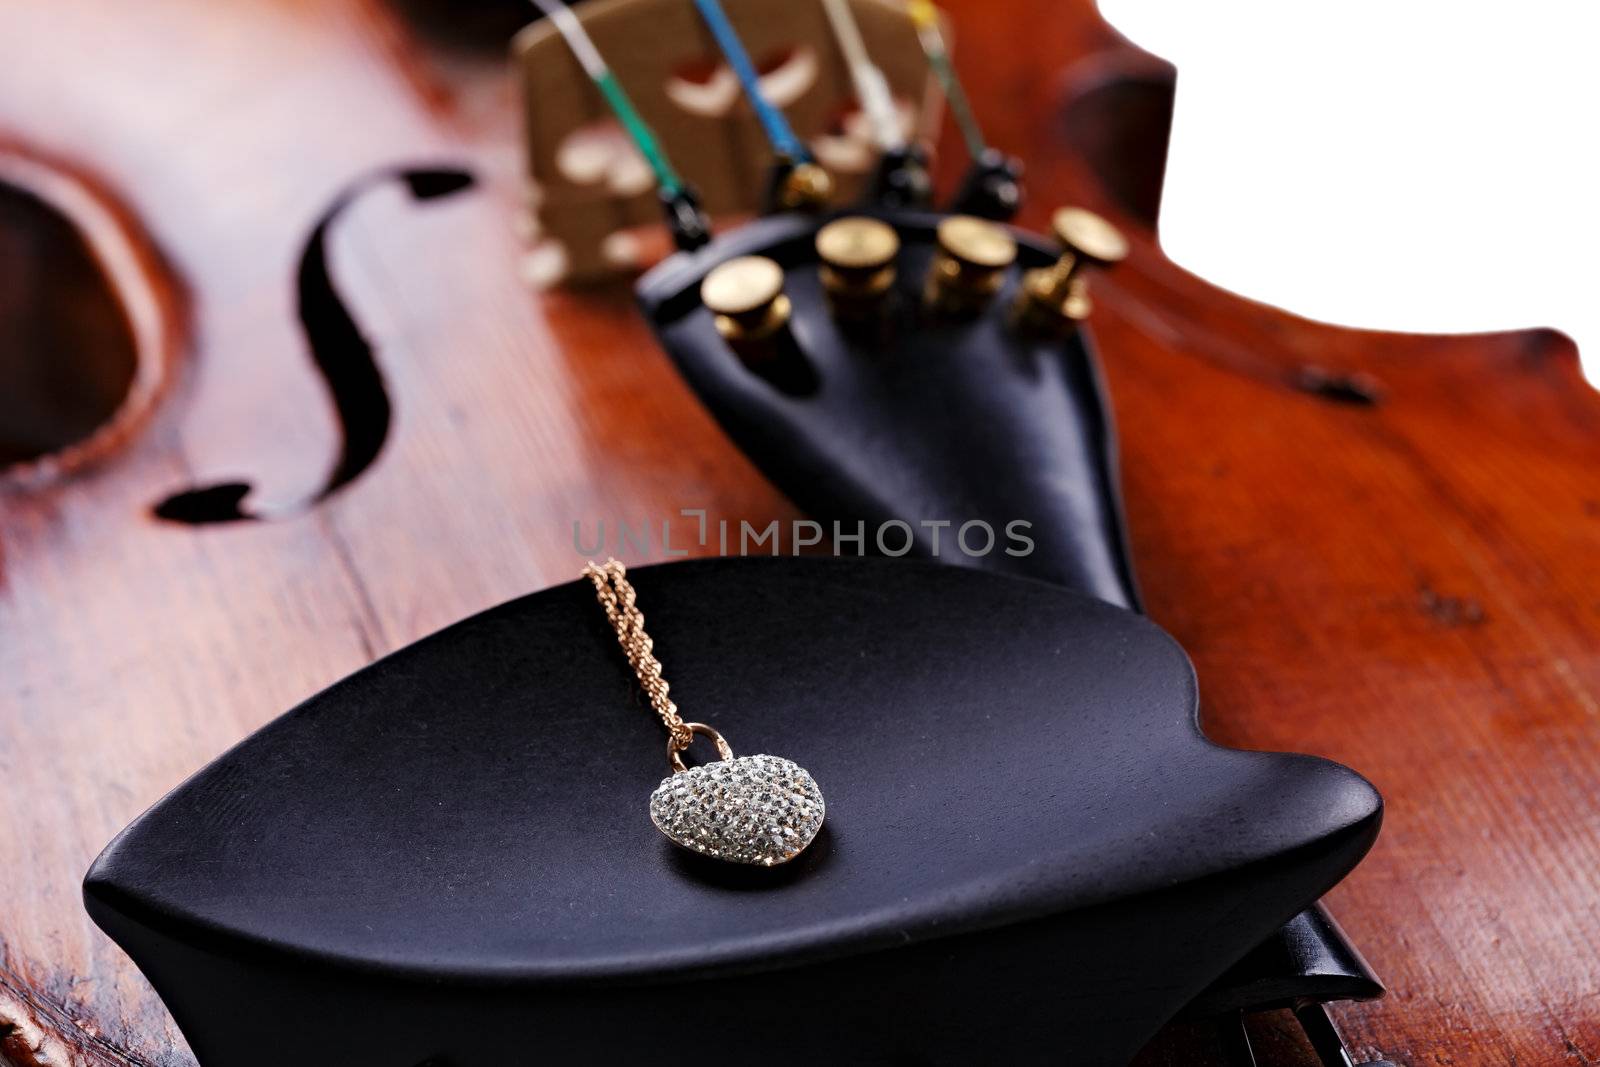 Old Violin with jewels on the chin